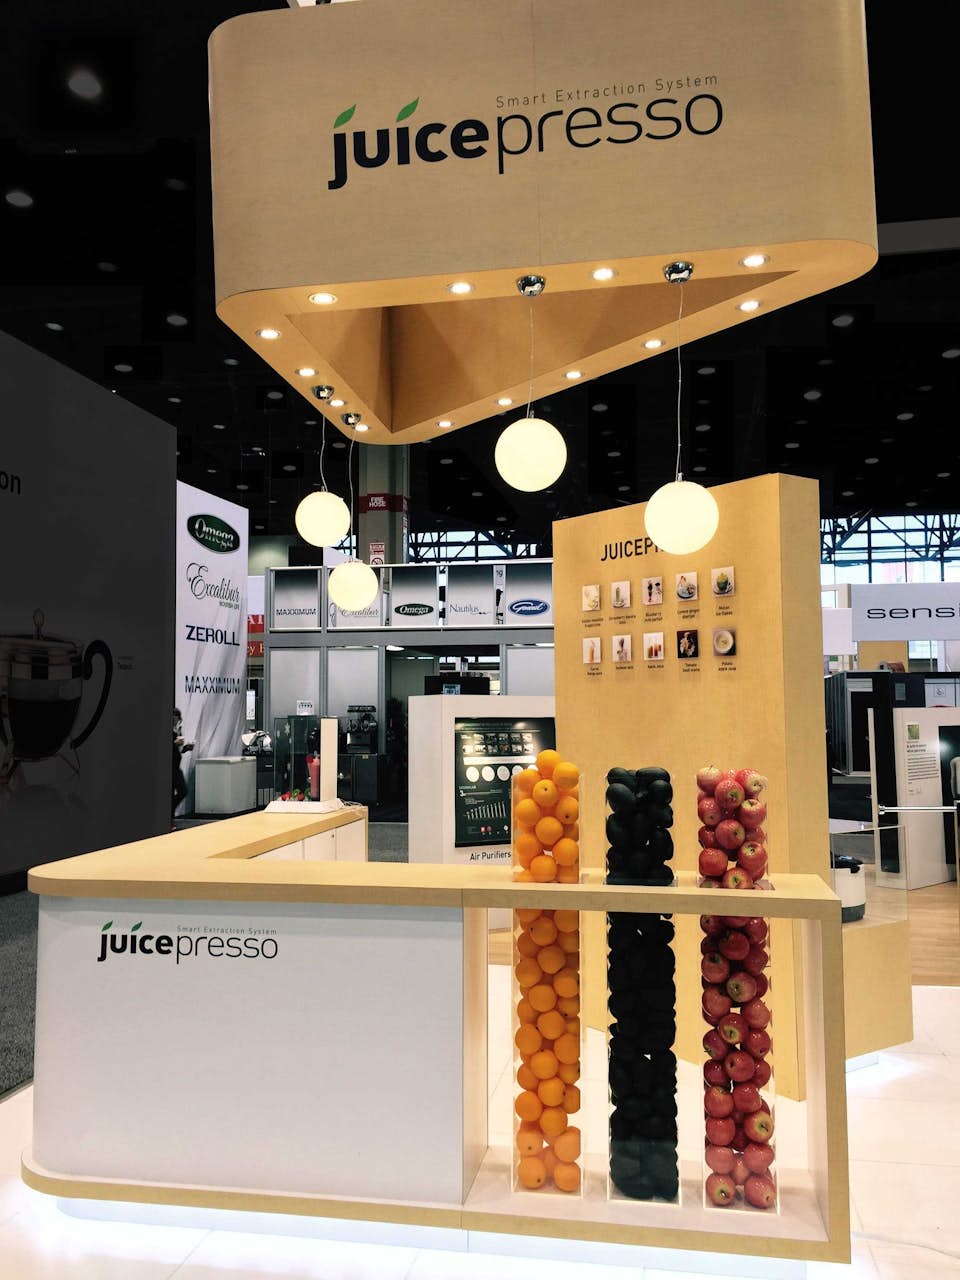 10 of the Best Trade Show Booth Ideas to Steal - The Brewery